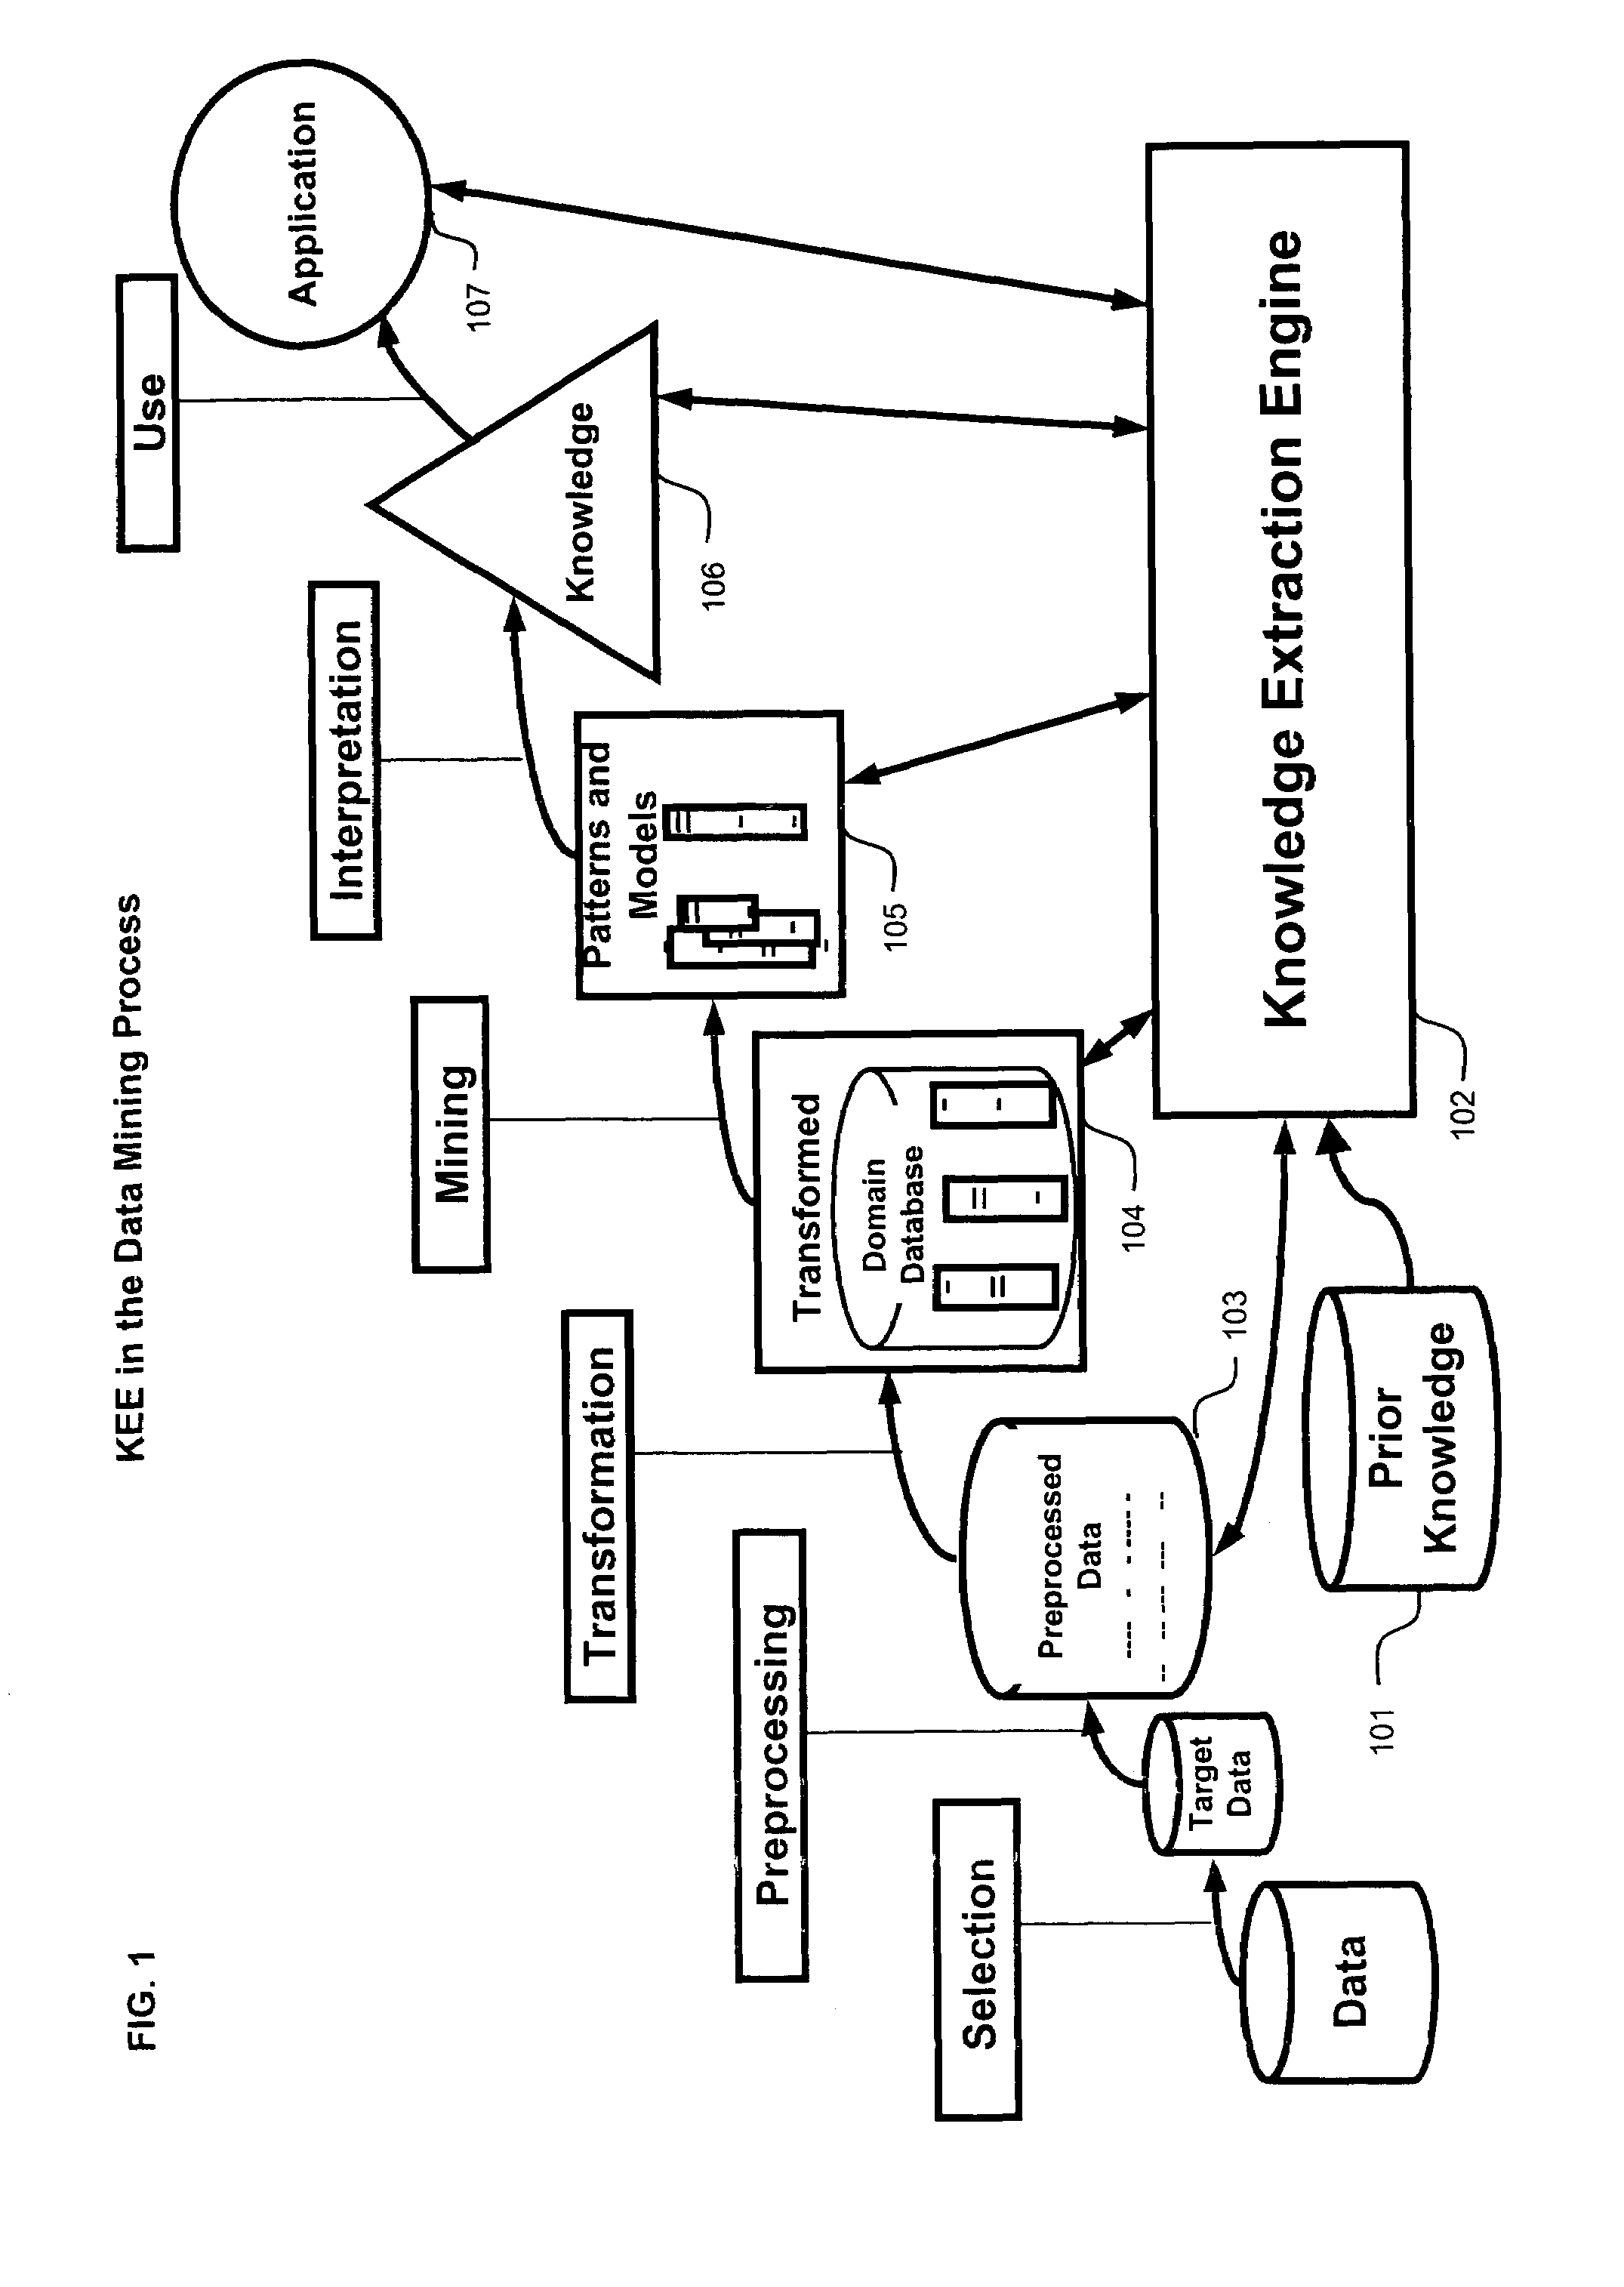 Automated method and system for generating models from data